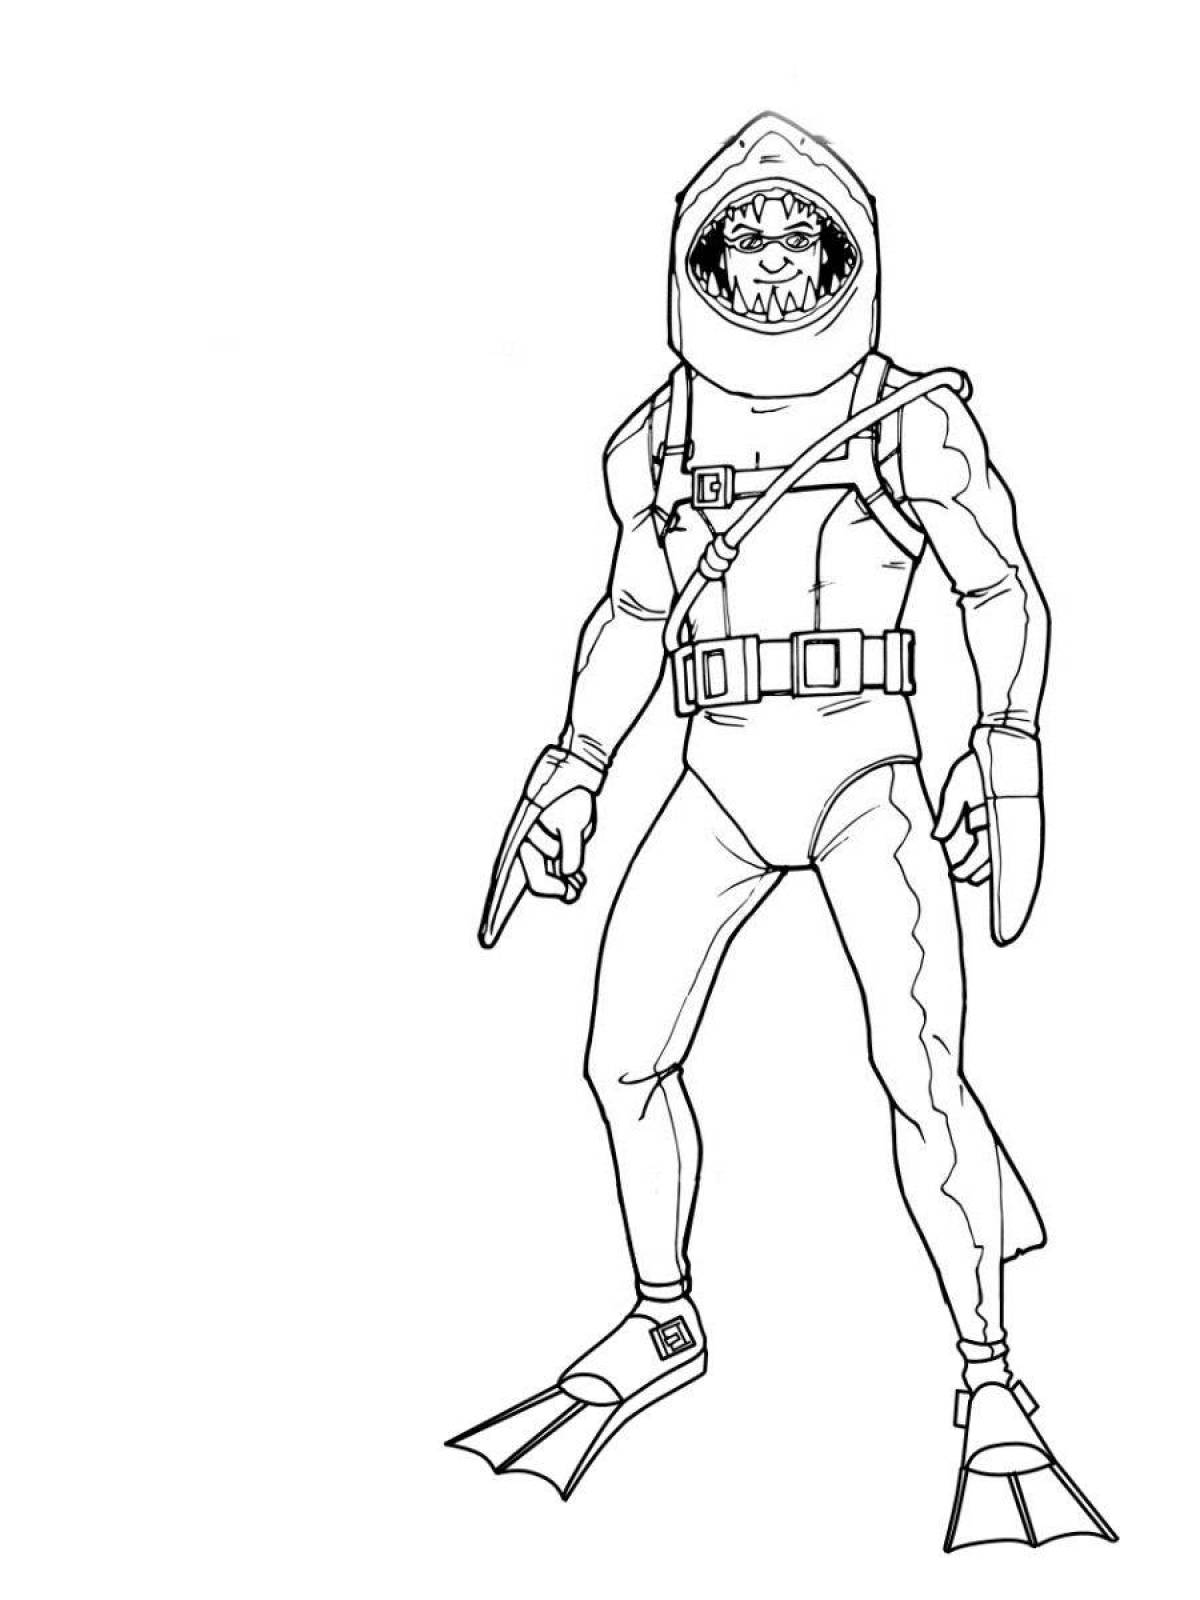 Regal ford knight coloring page